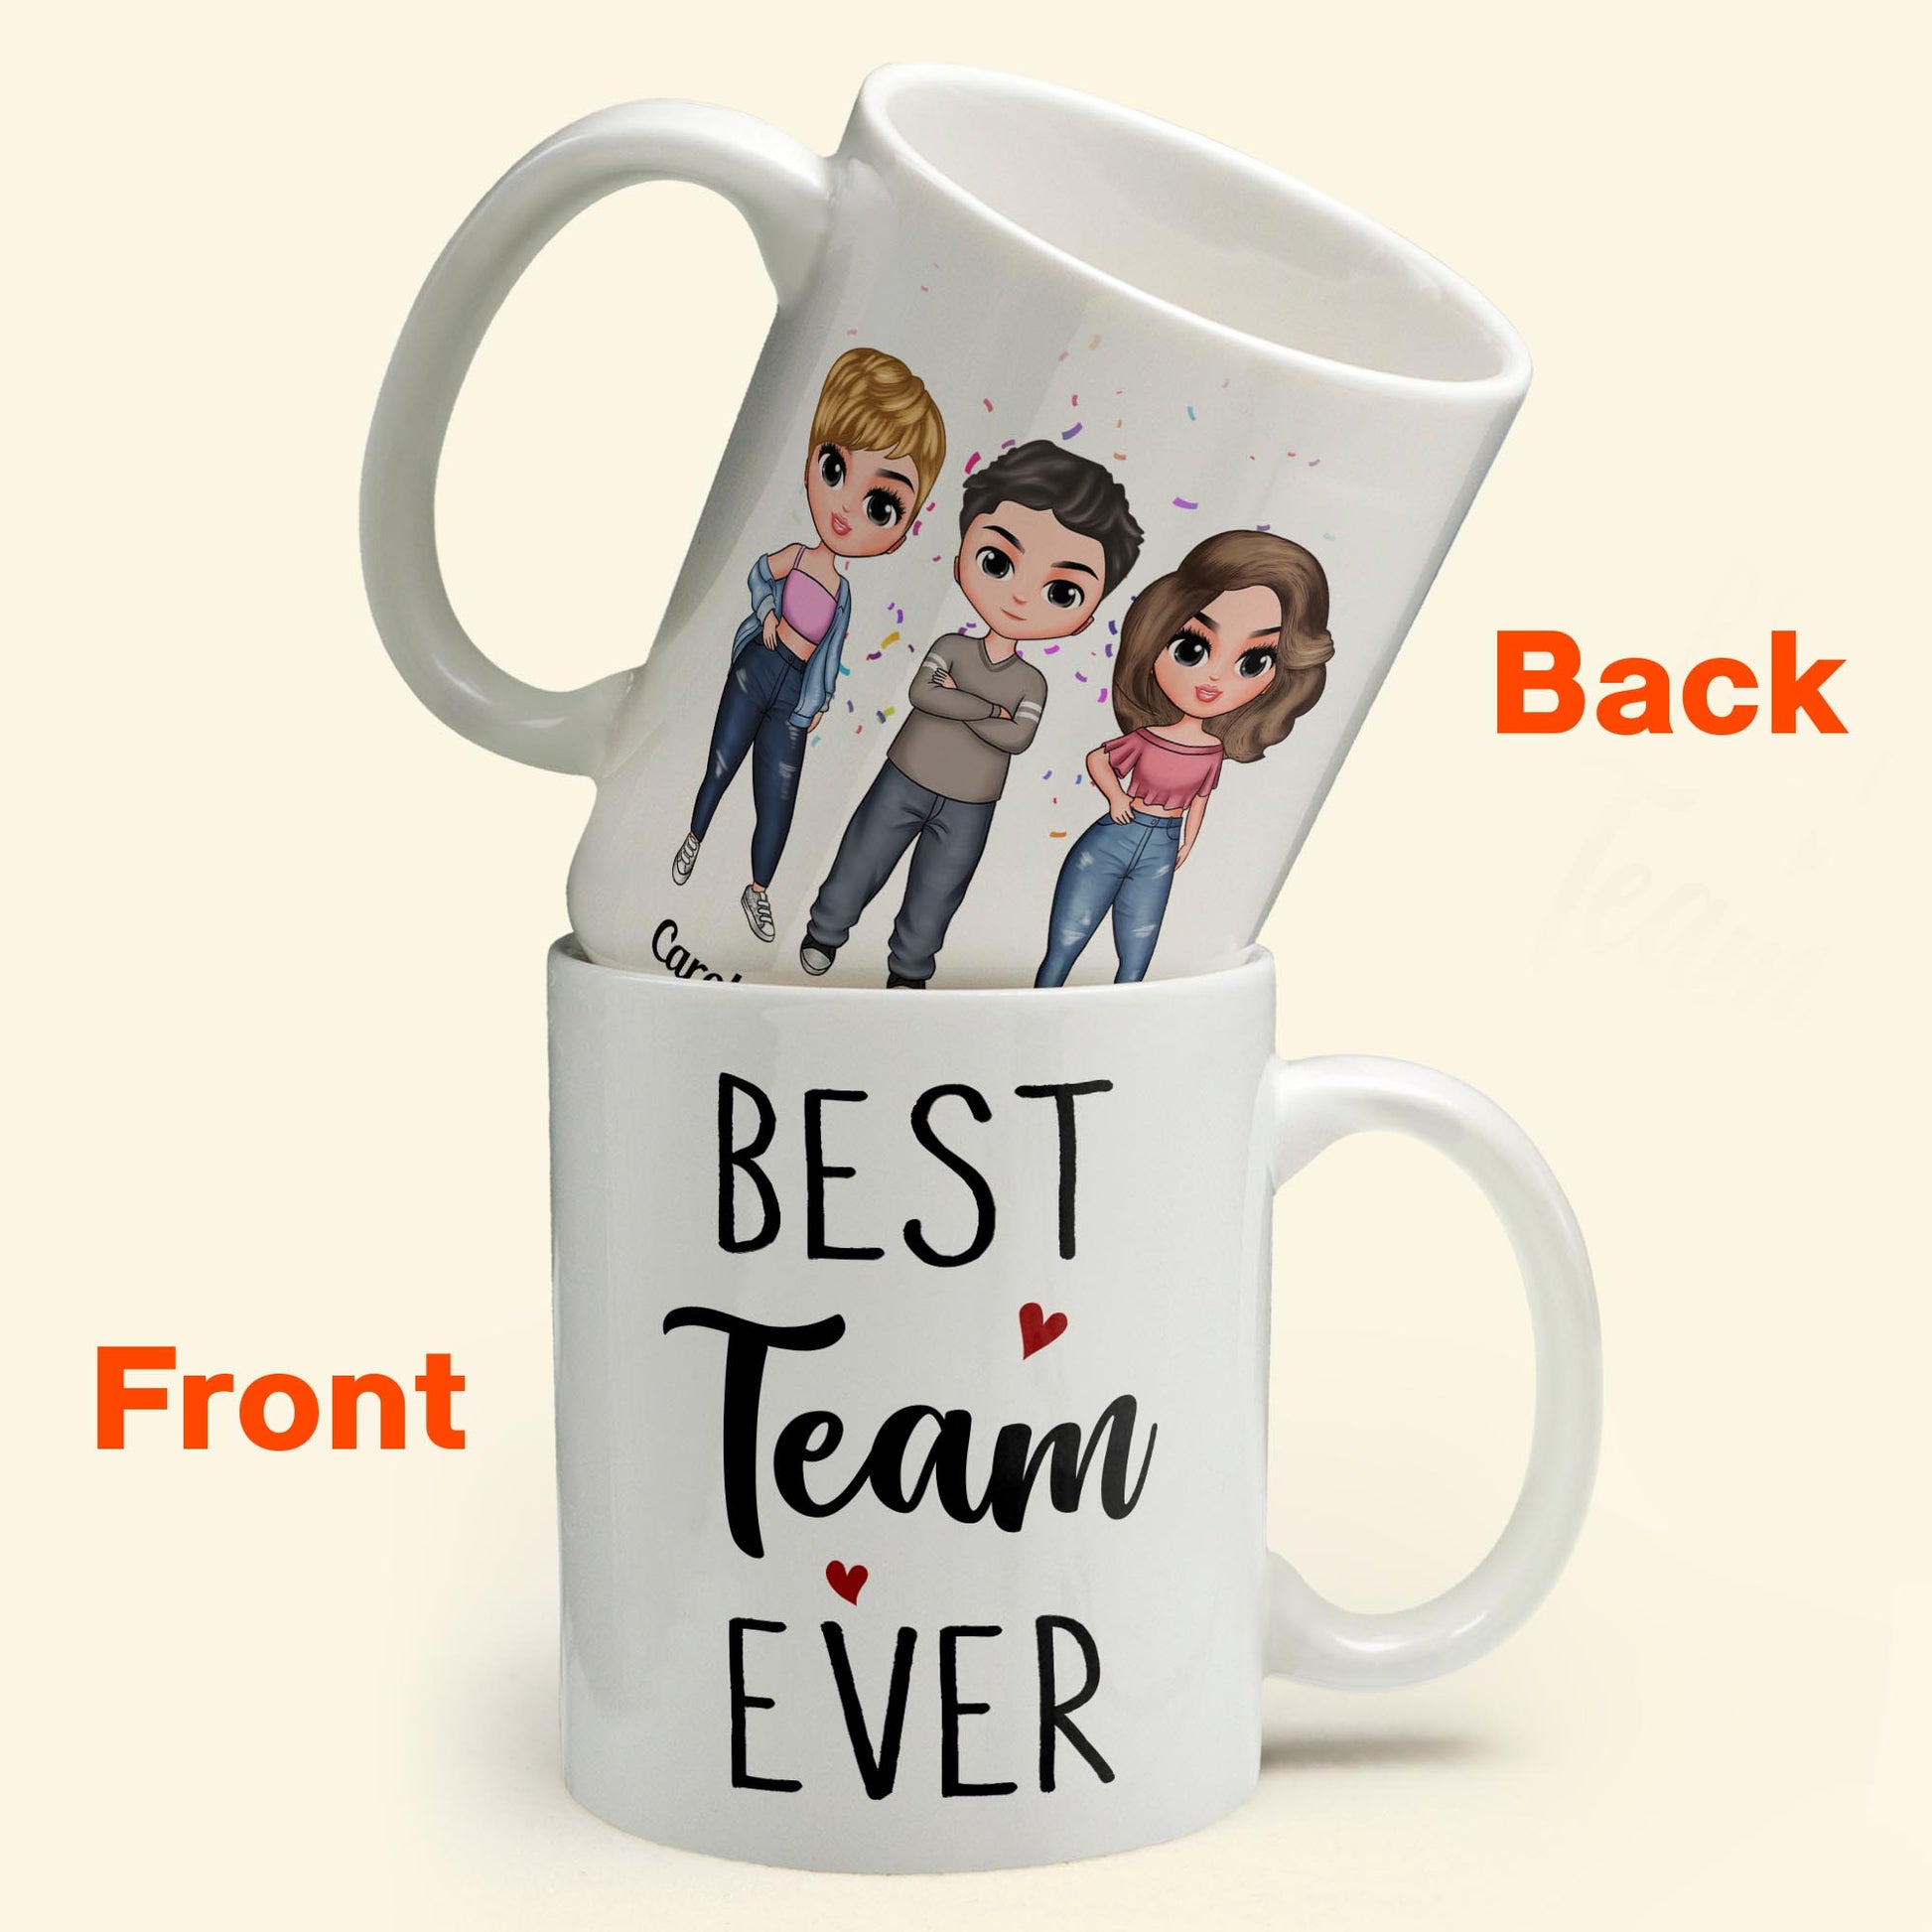 Best Team Ever - Personalized Mug - Birthday, Christmas Gift For Colleagues